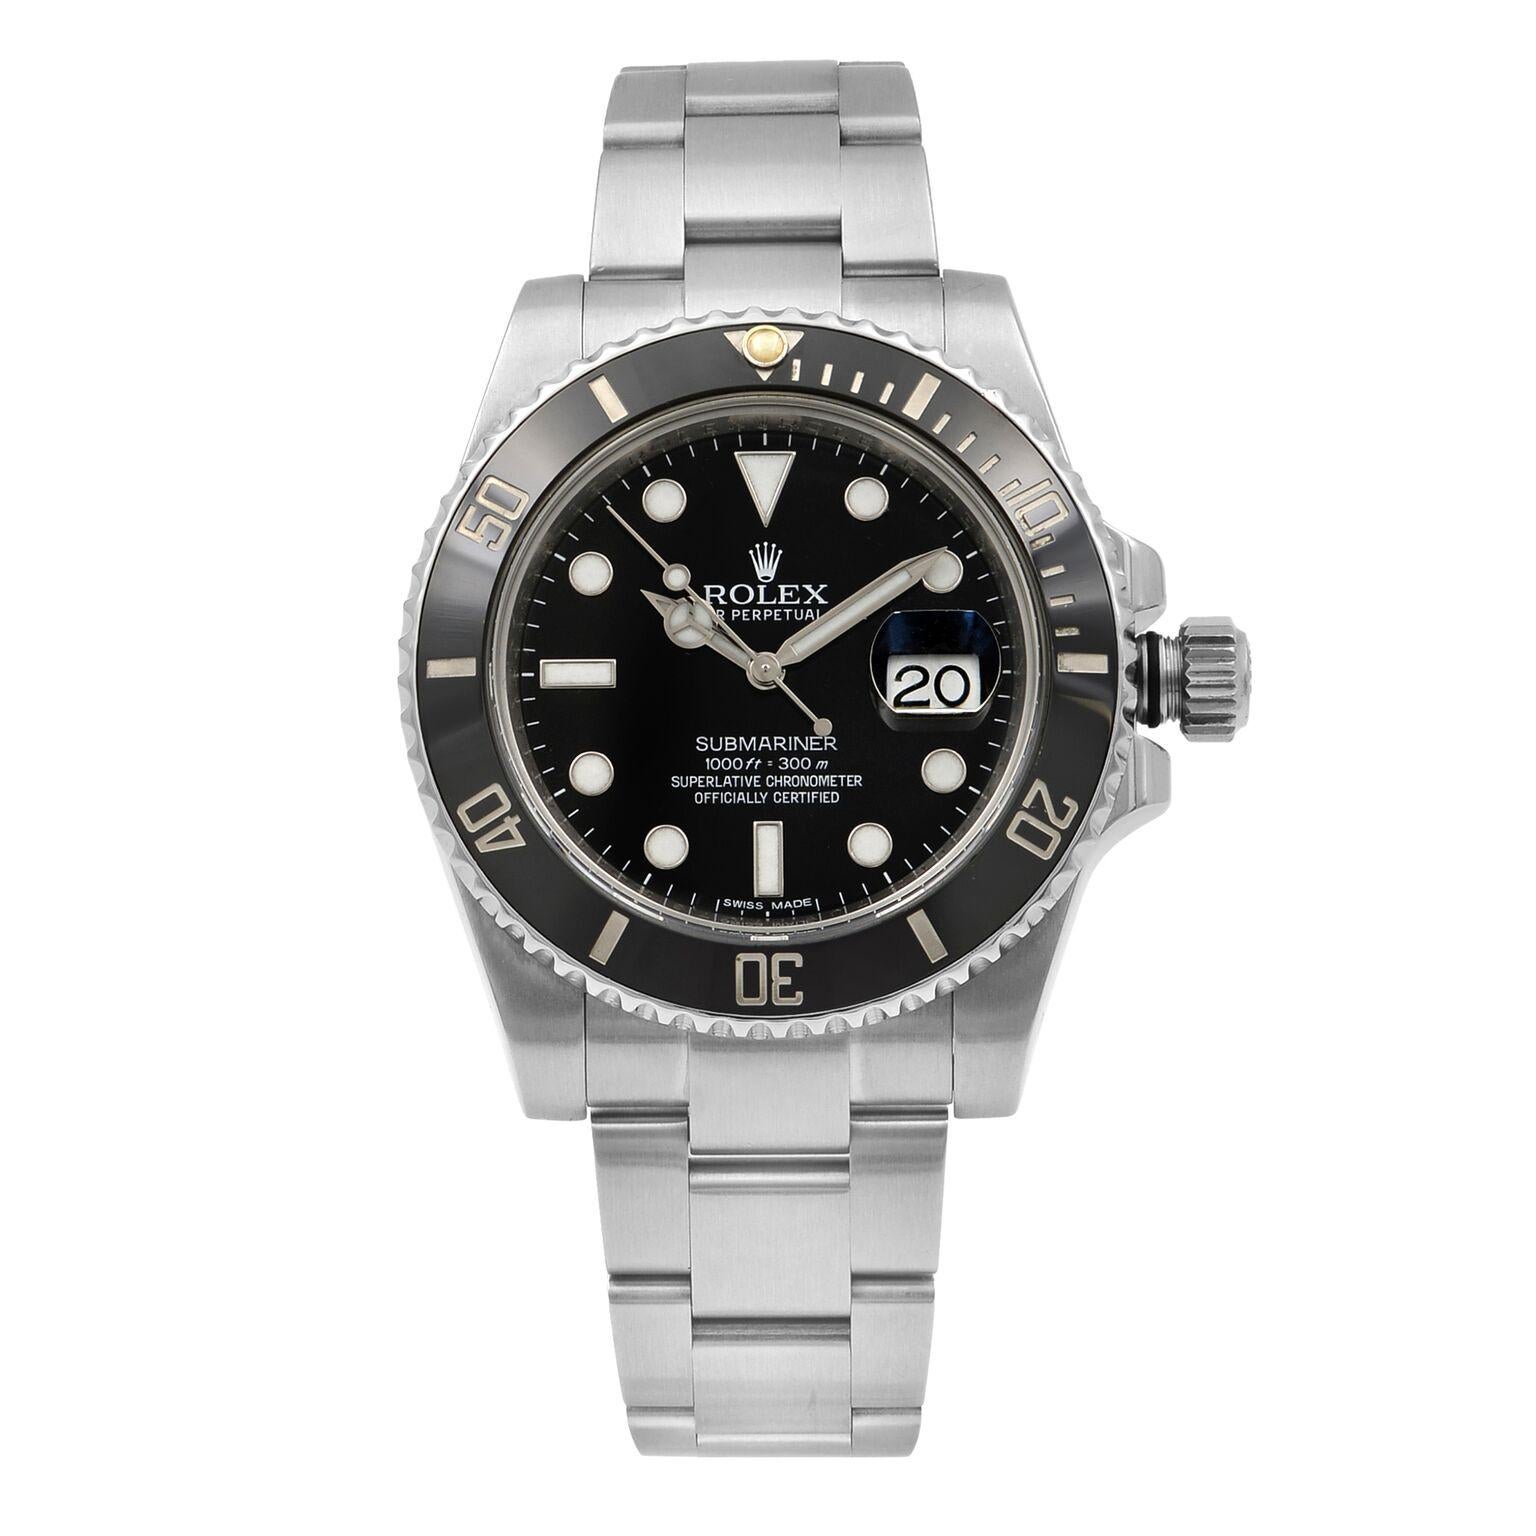 This pre-owned Rolex Submariner 116610 is a beautiful men's timepiece that is powered by mechanical (automatic) movement which is cased in a stainless steel case. It has a round shape face, date indicator dial and has hand sticks & numerals style